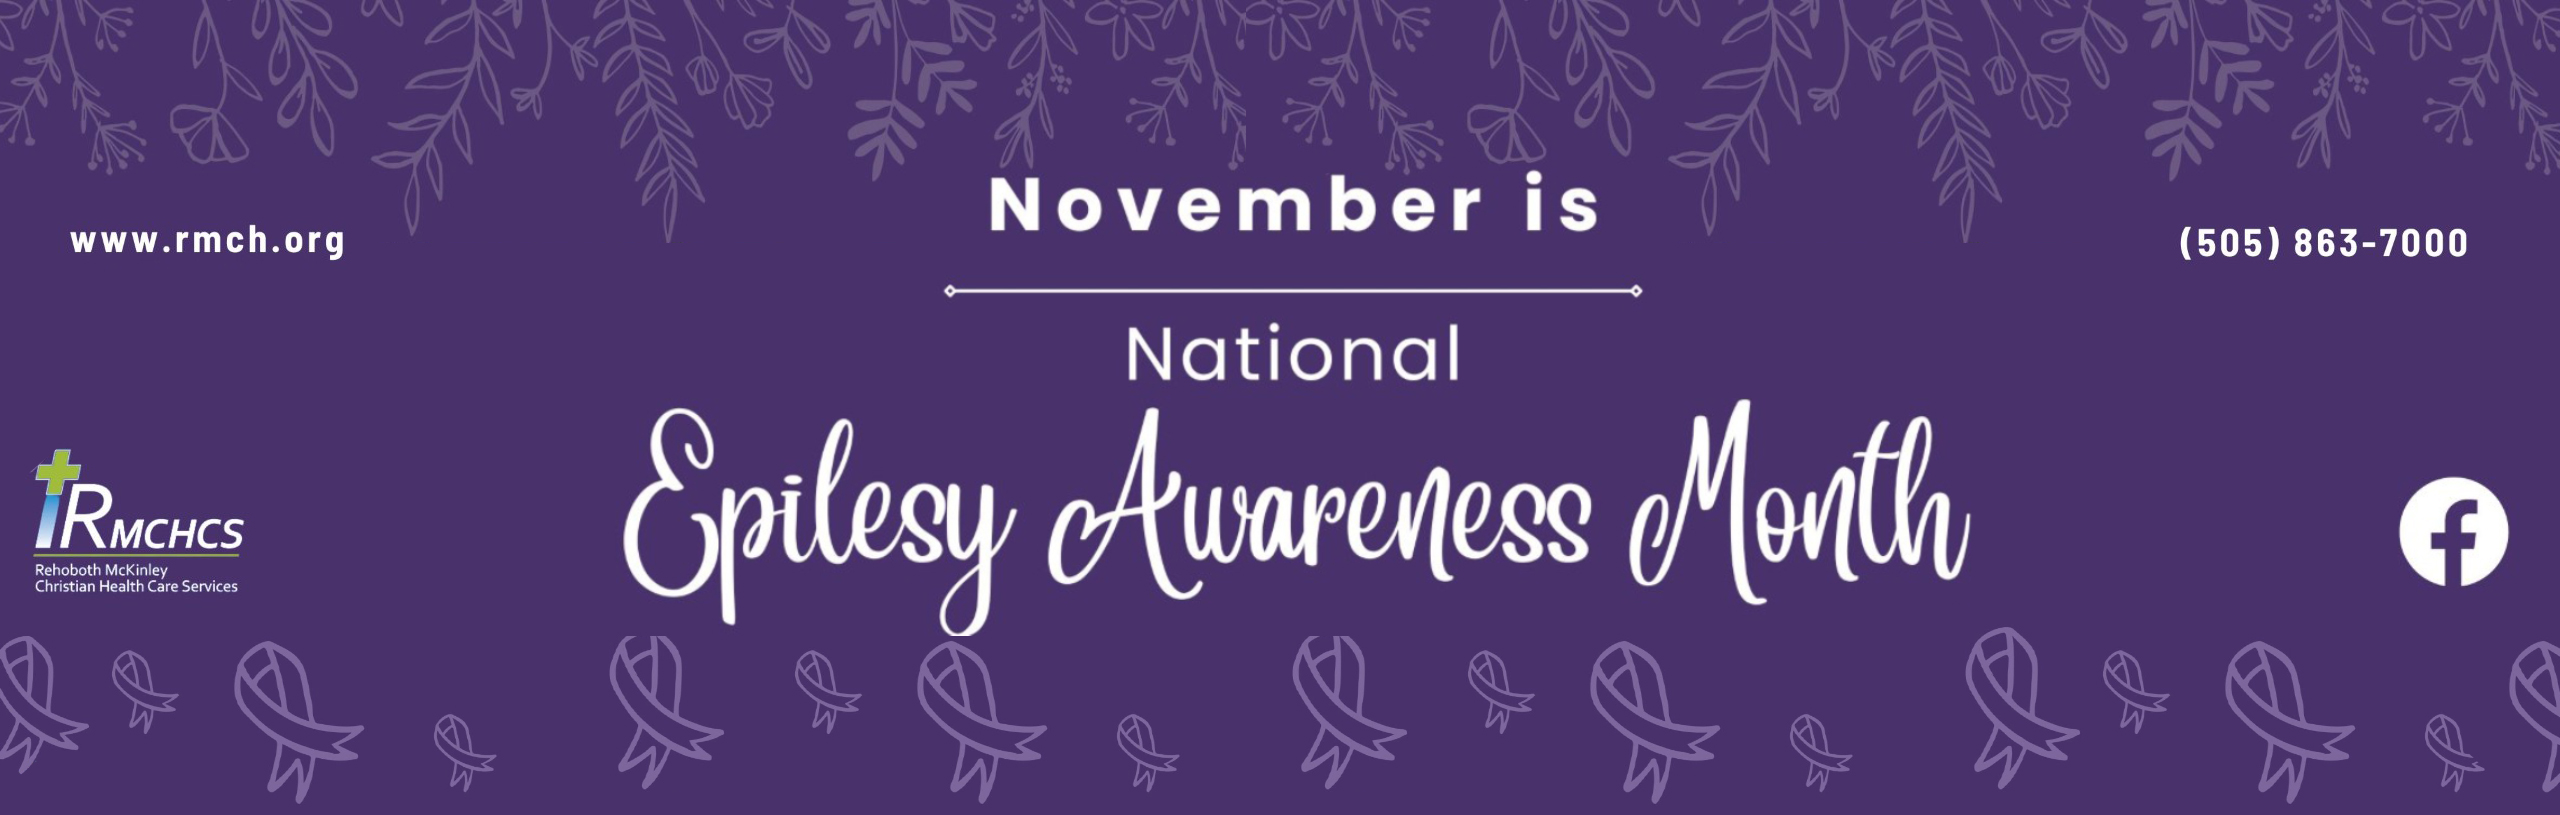 November is National Epilesy Awareness Month
(505) 863-7000

www.rmch.org
RMCHCS
Rehoboth Mckinley Christian Health Care Services